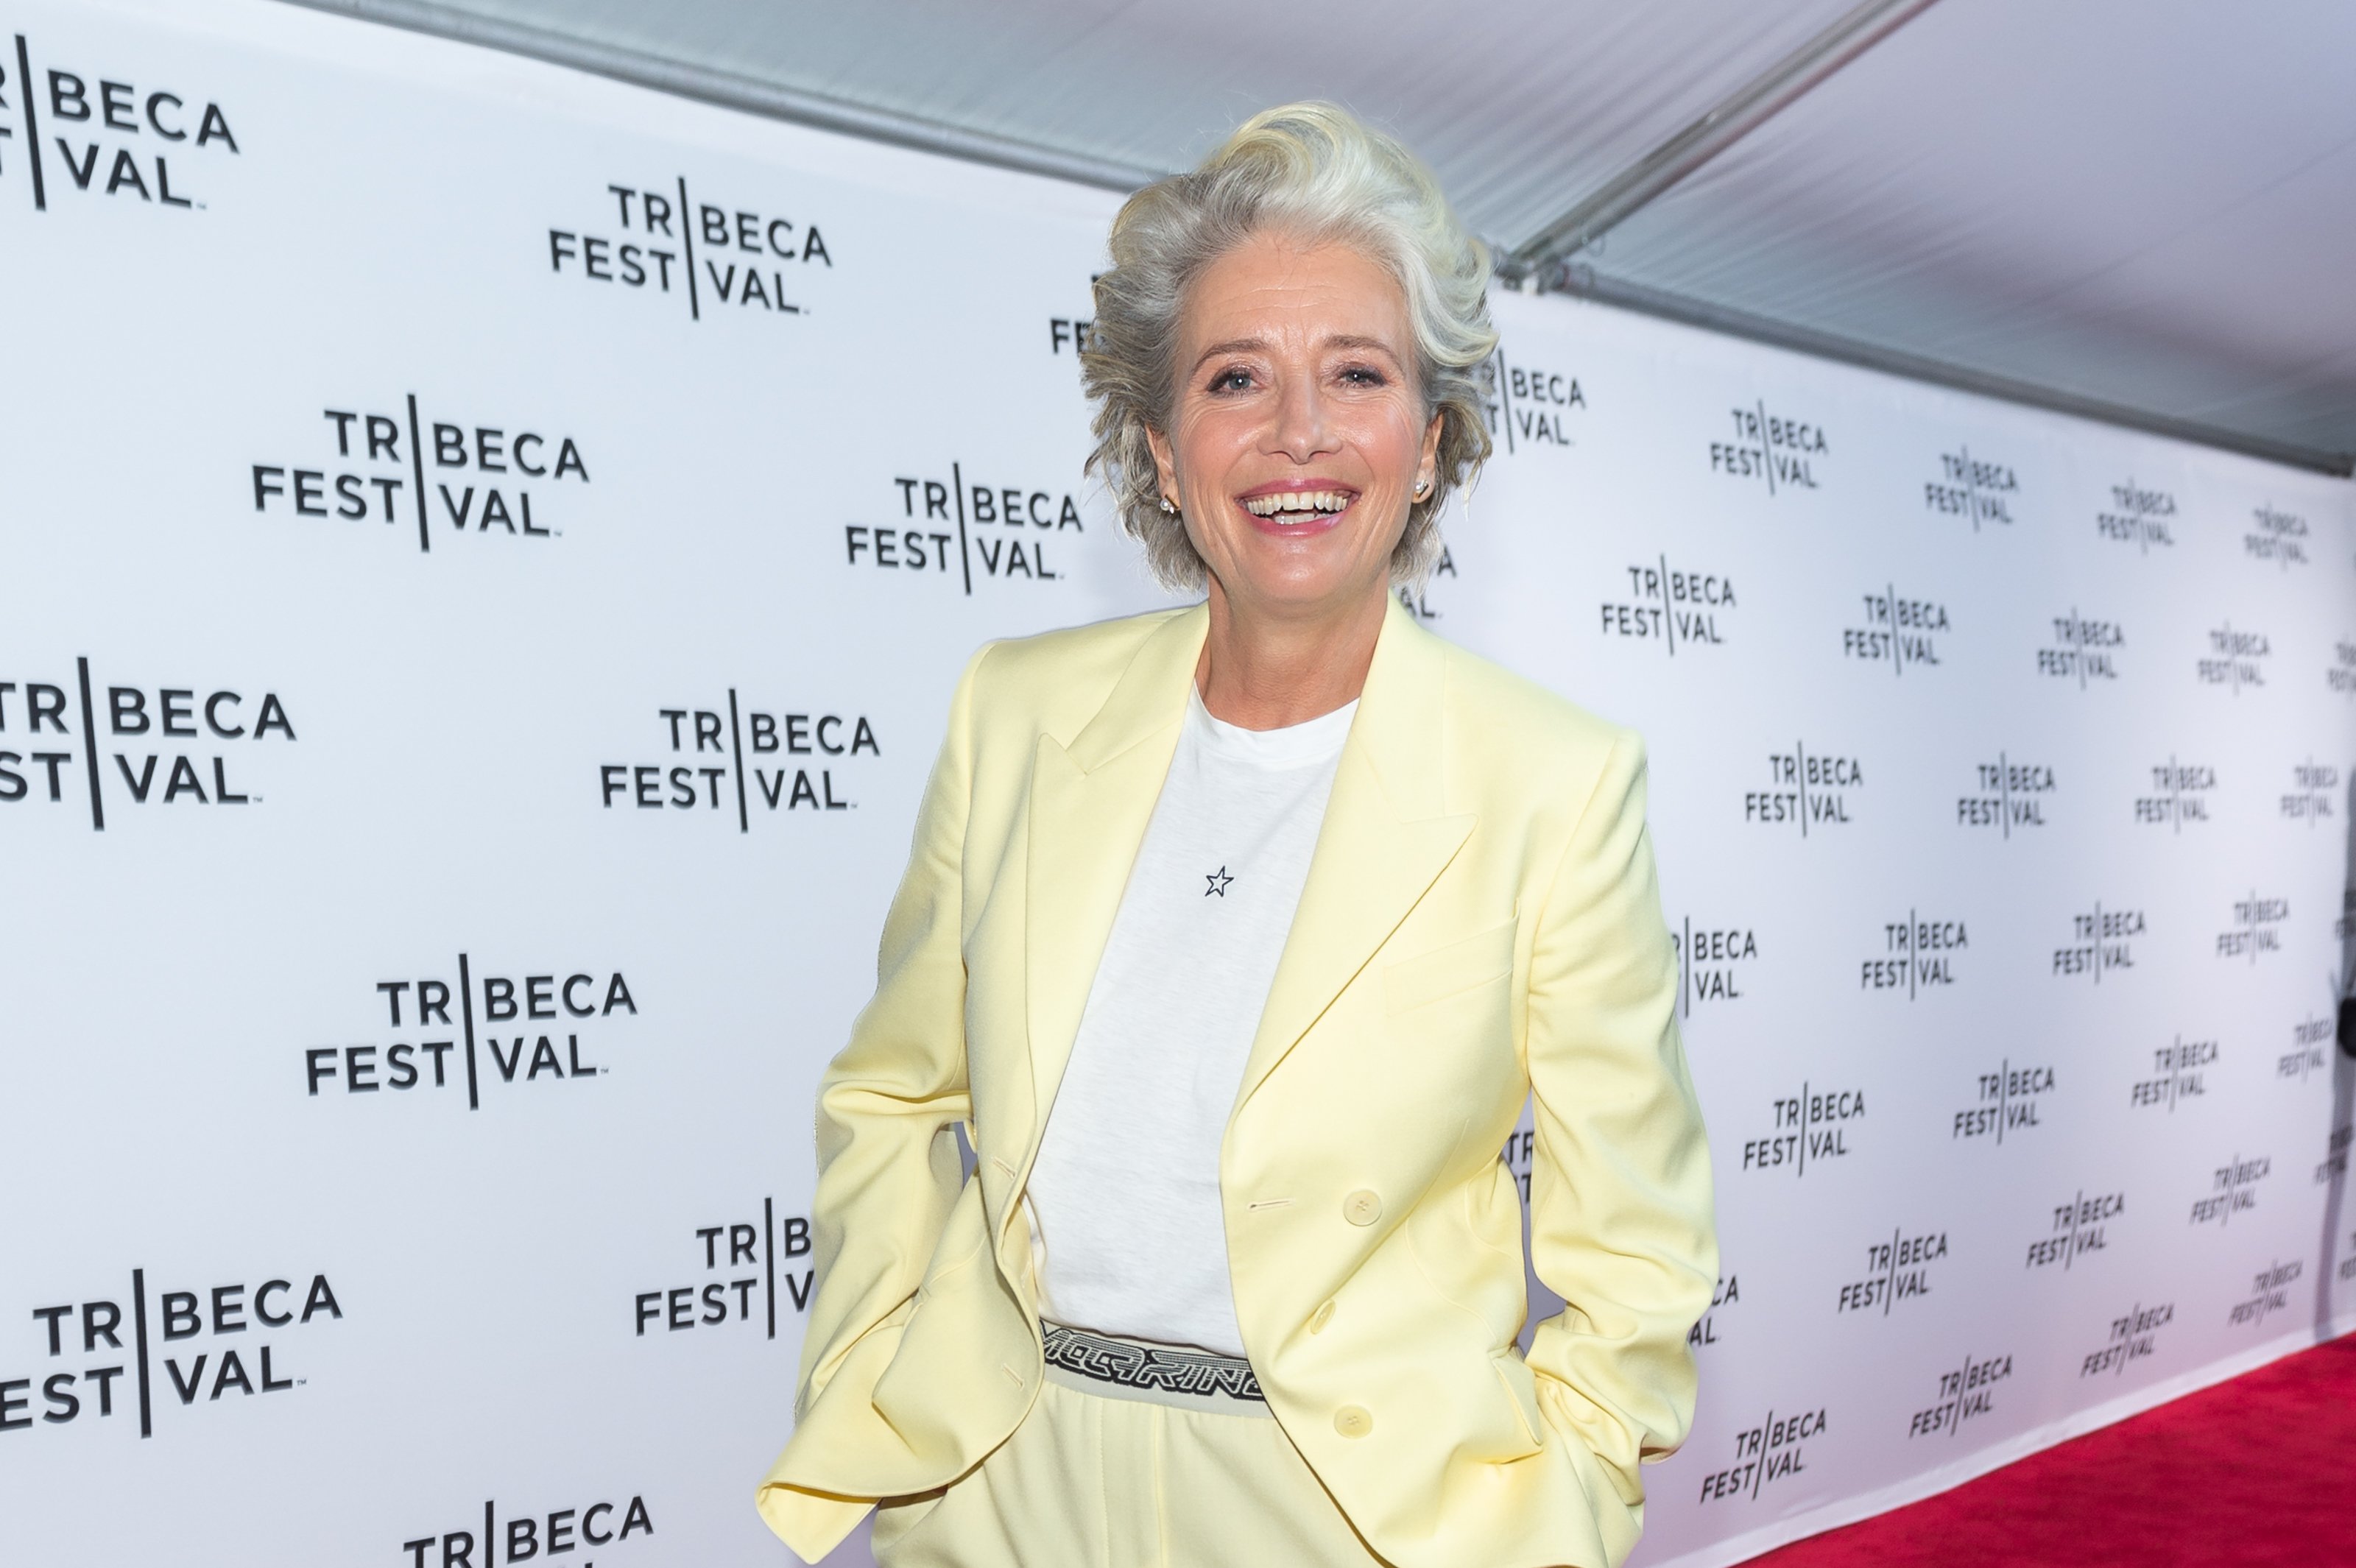 Emma Thompson attends the premiere of "Good Luck To You, Leo Grande" at the 2022 Tribeca Festival on June 15, 2022, in New York City. | Source: Getty Images